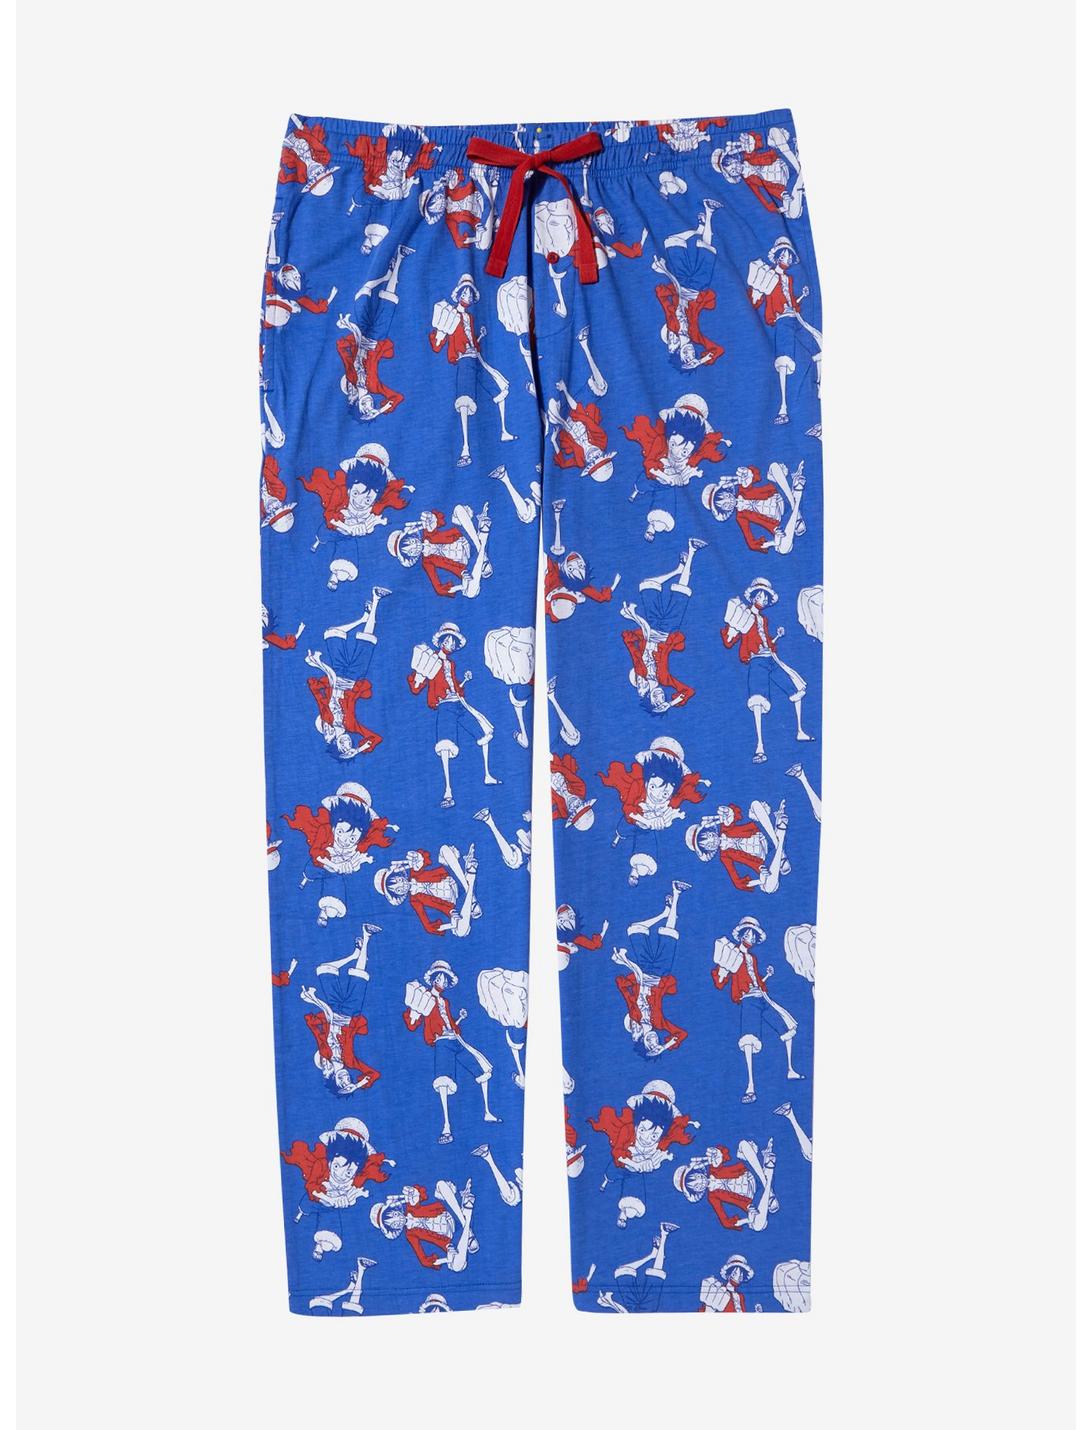 One Piece Monkey D. Luffy Poses Sleep Pants - BoxLunch Exclusive, BLUE, hi-res